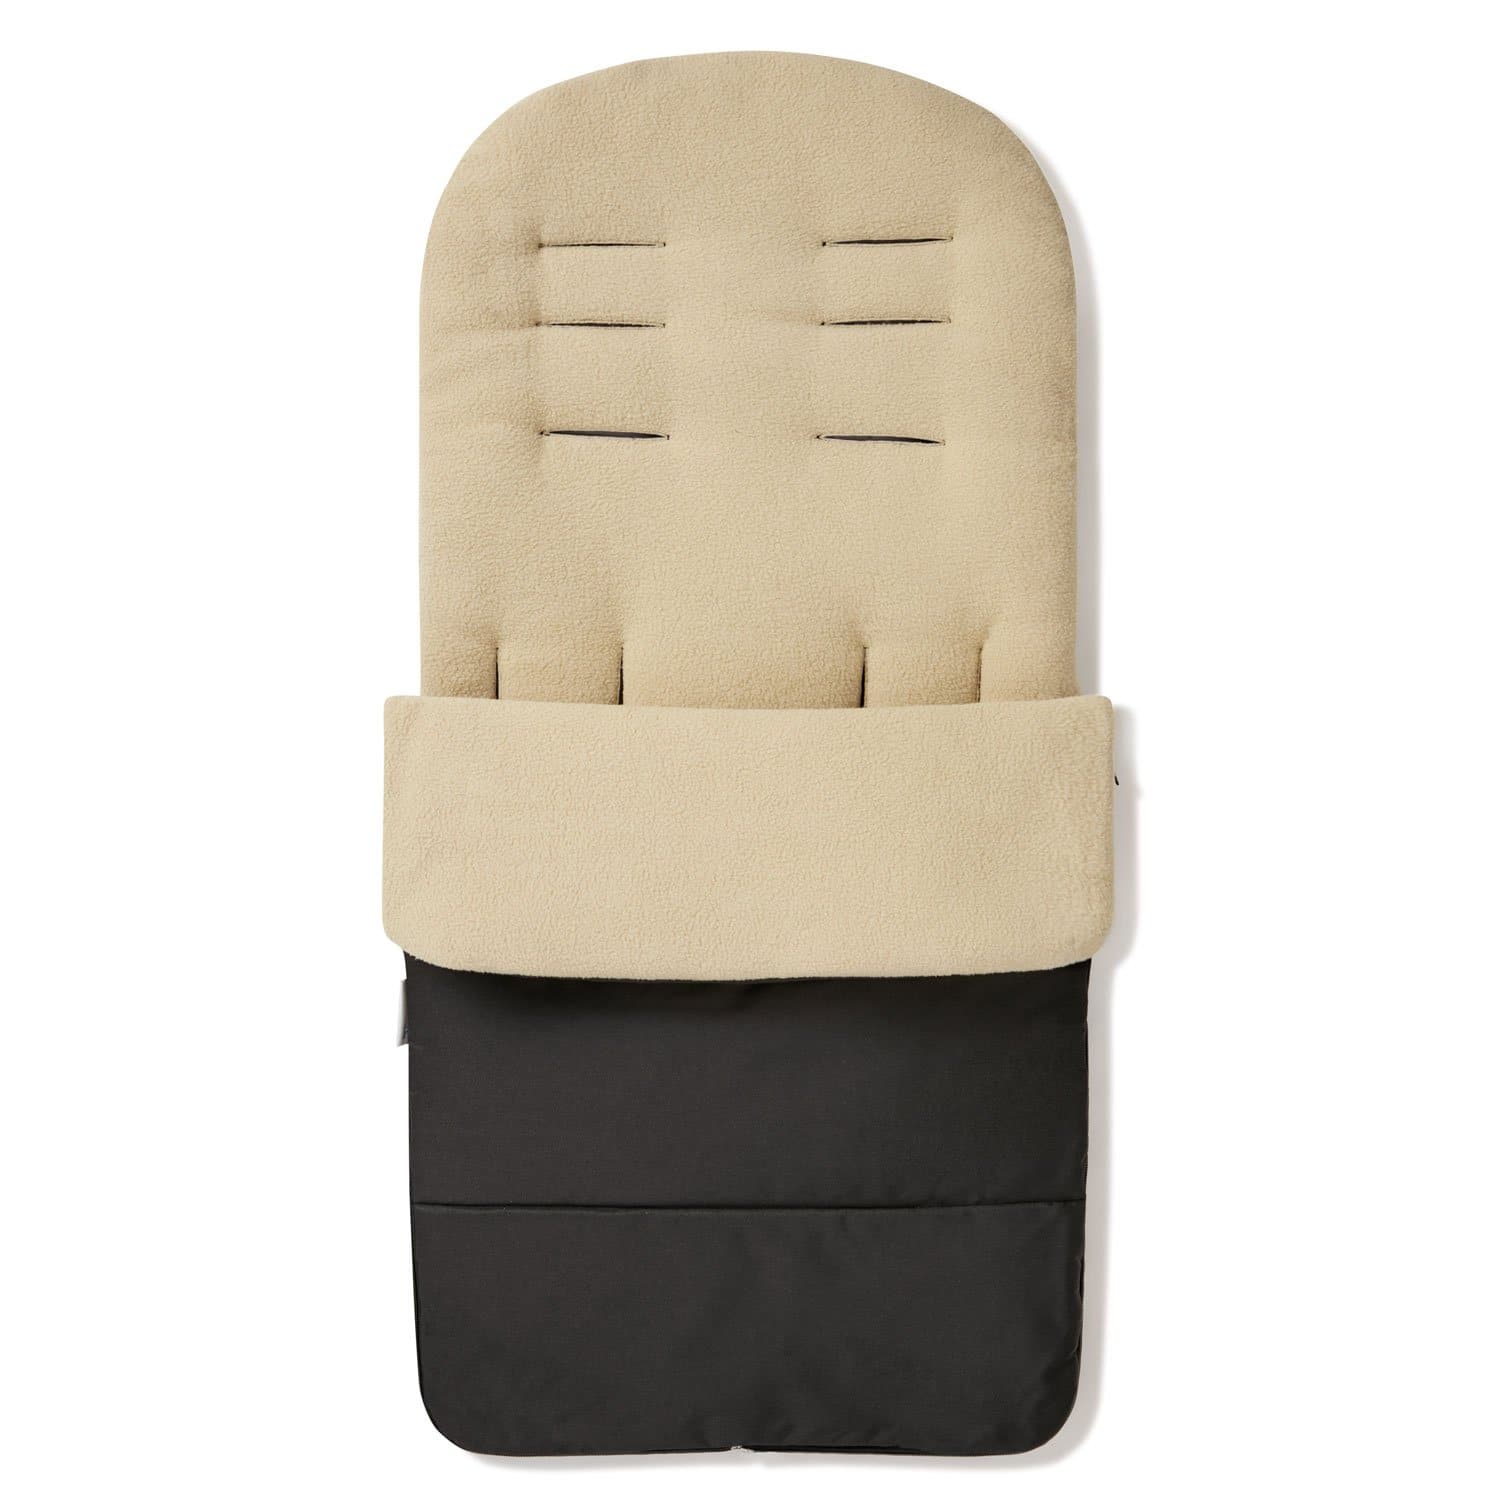 Premium Footmuff / Cosy Toes Compatible with Kiddicouture - For Your Little One